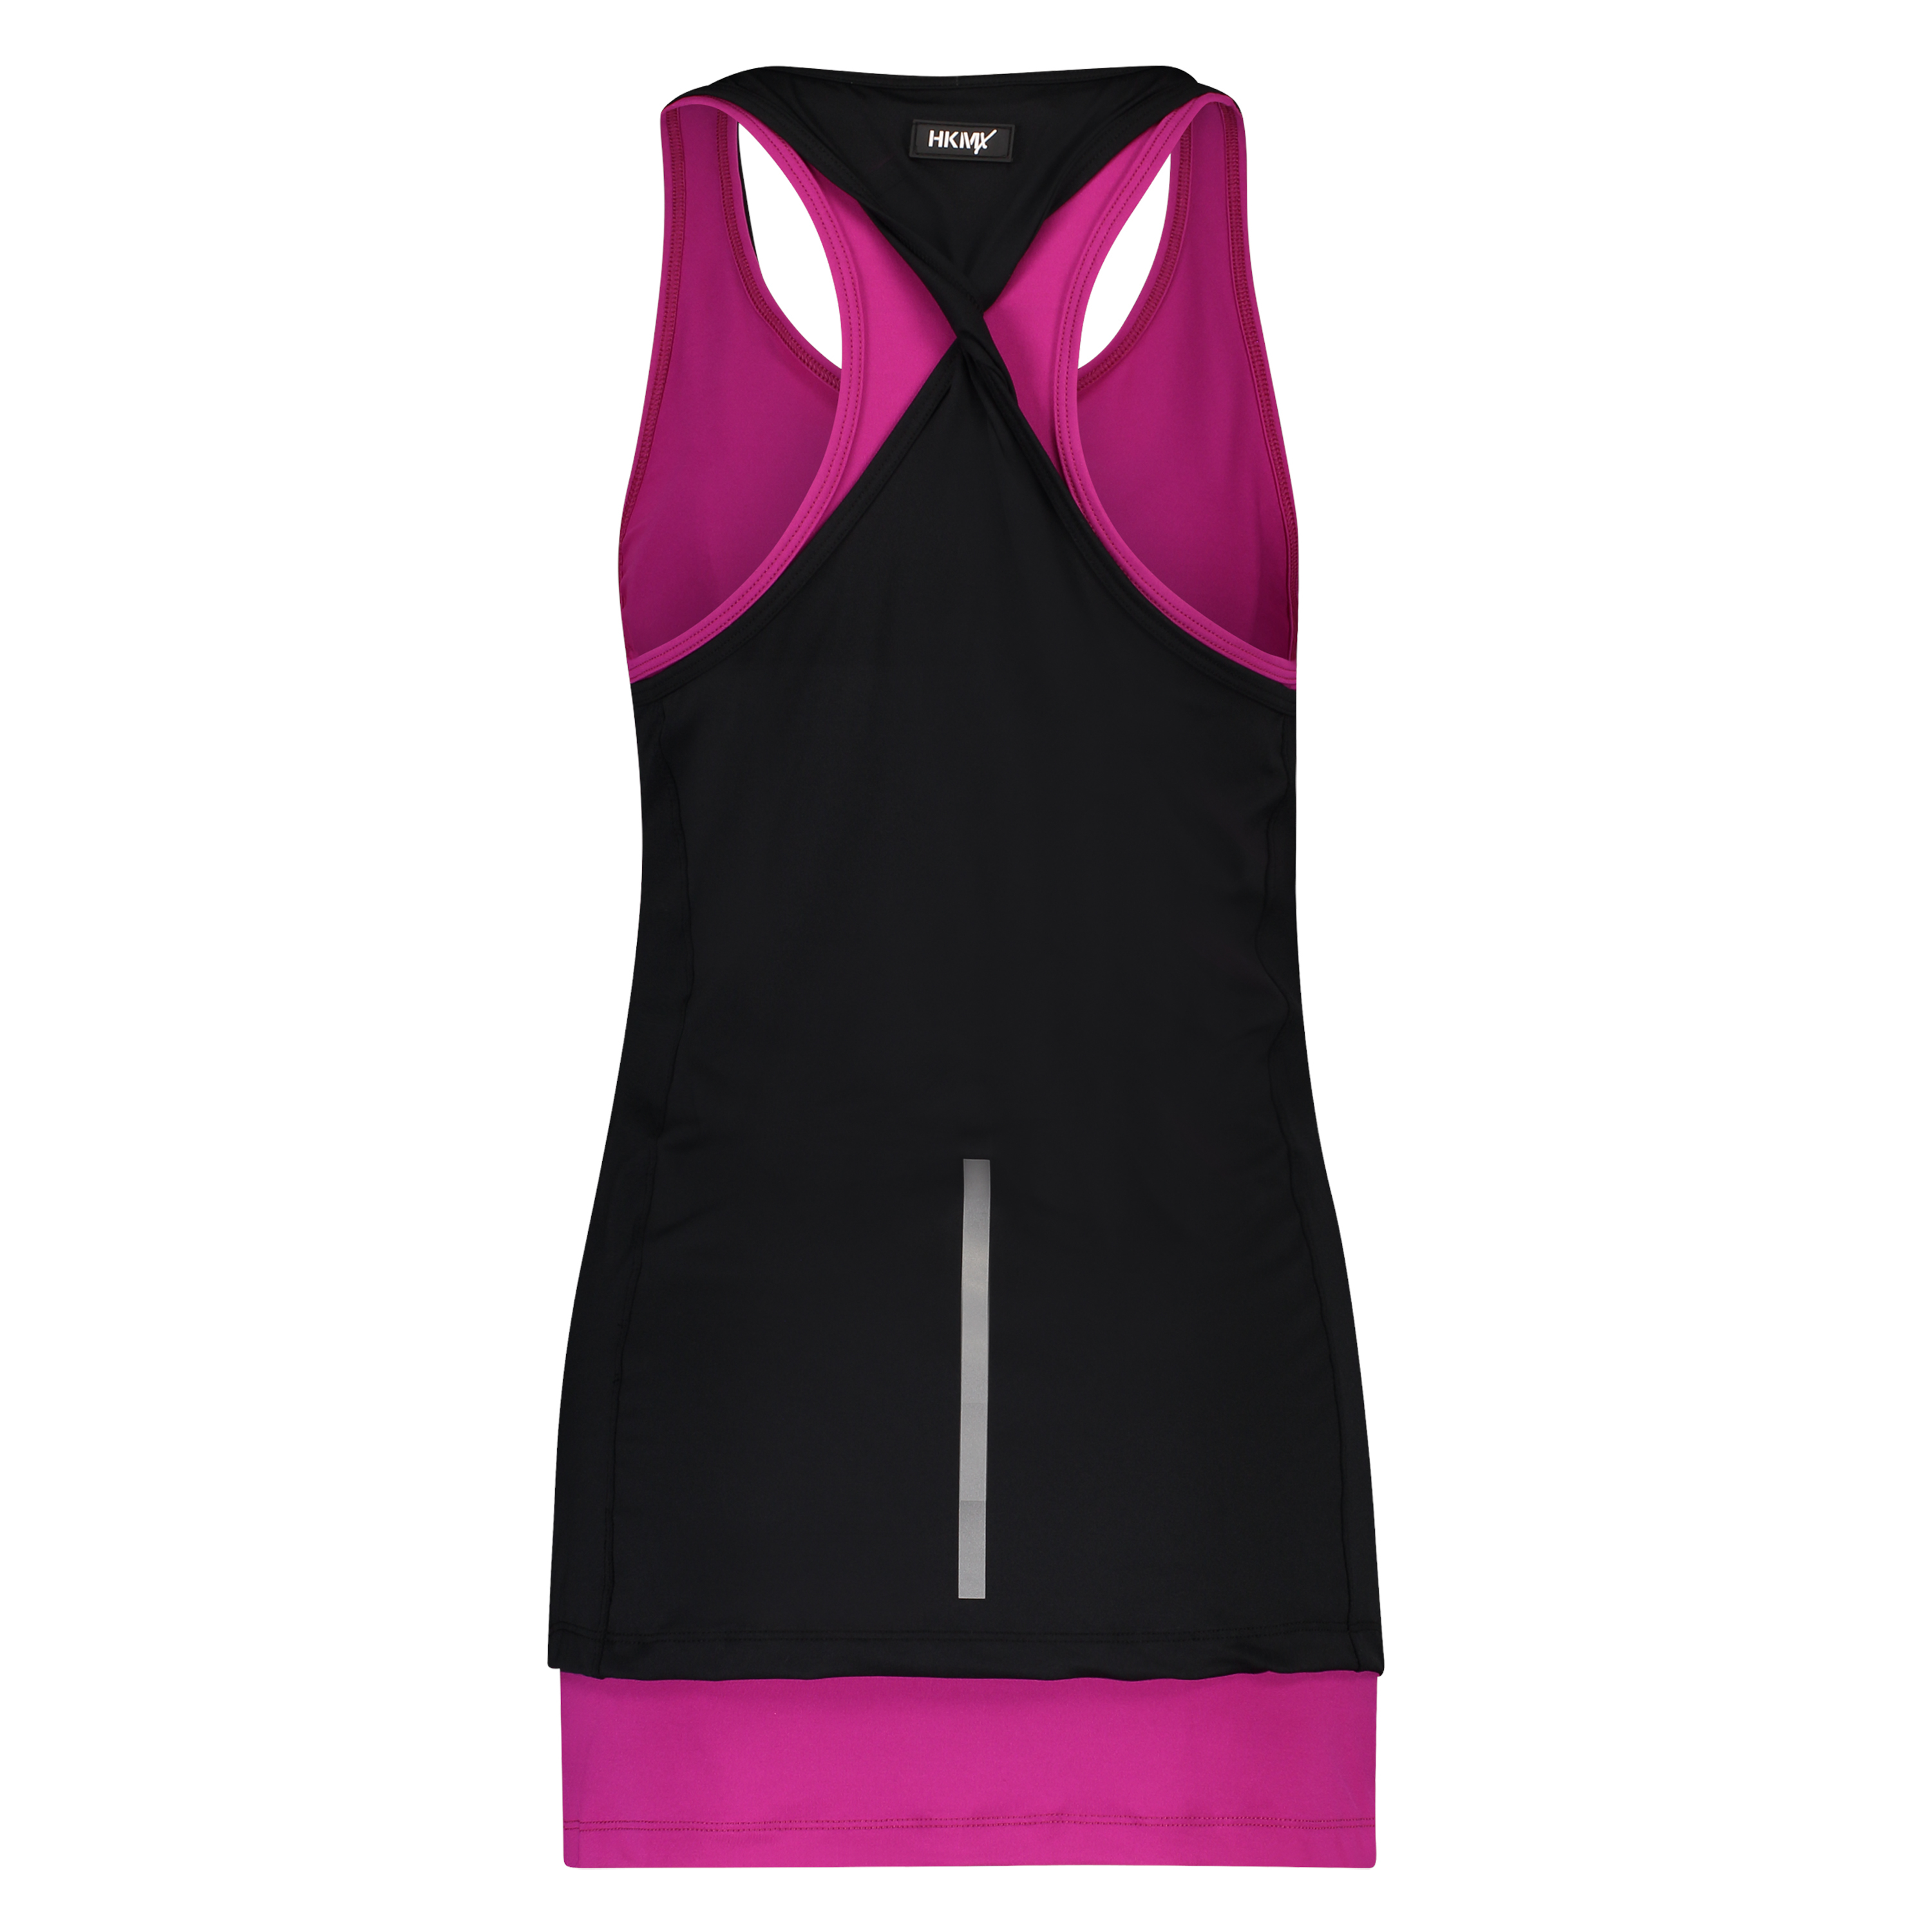 HKMX Sports Top, Fioletowy, main